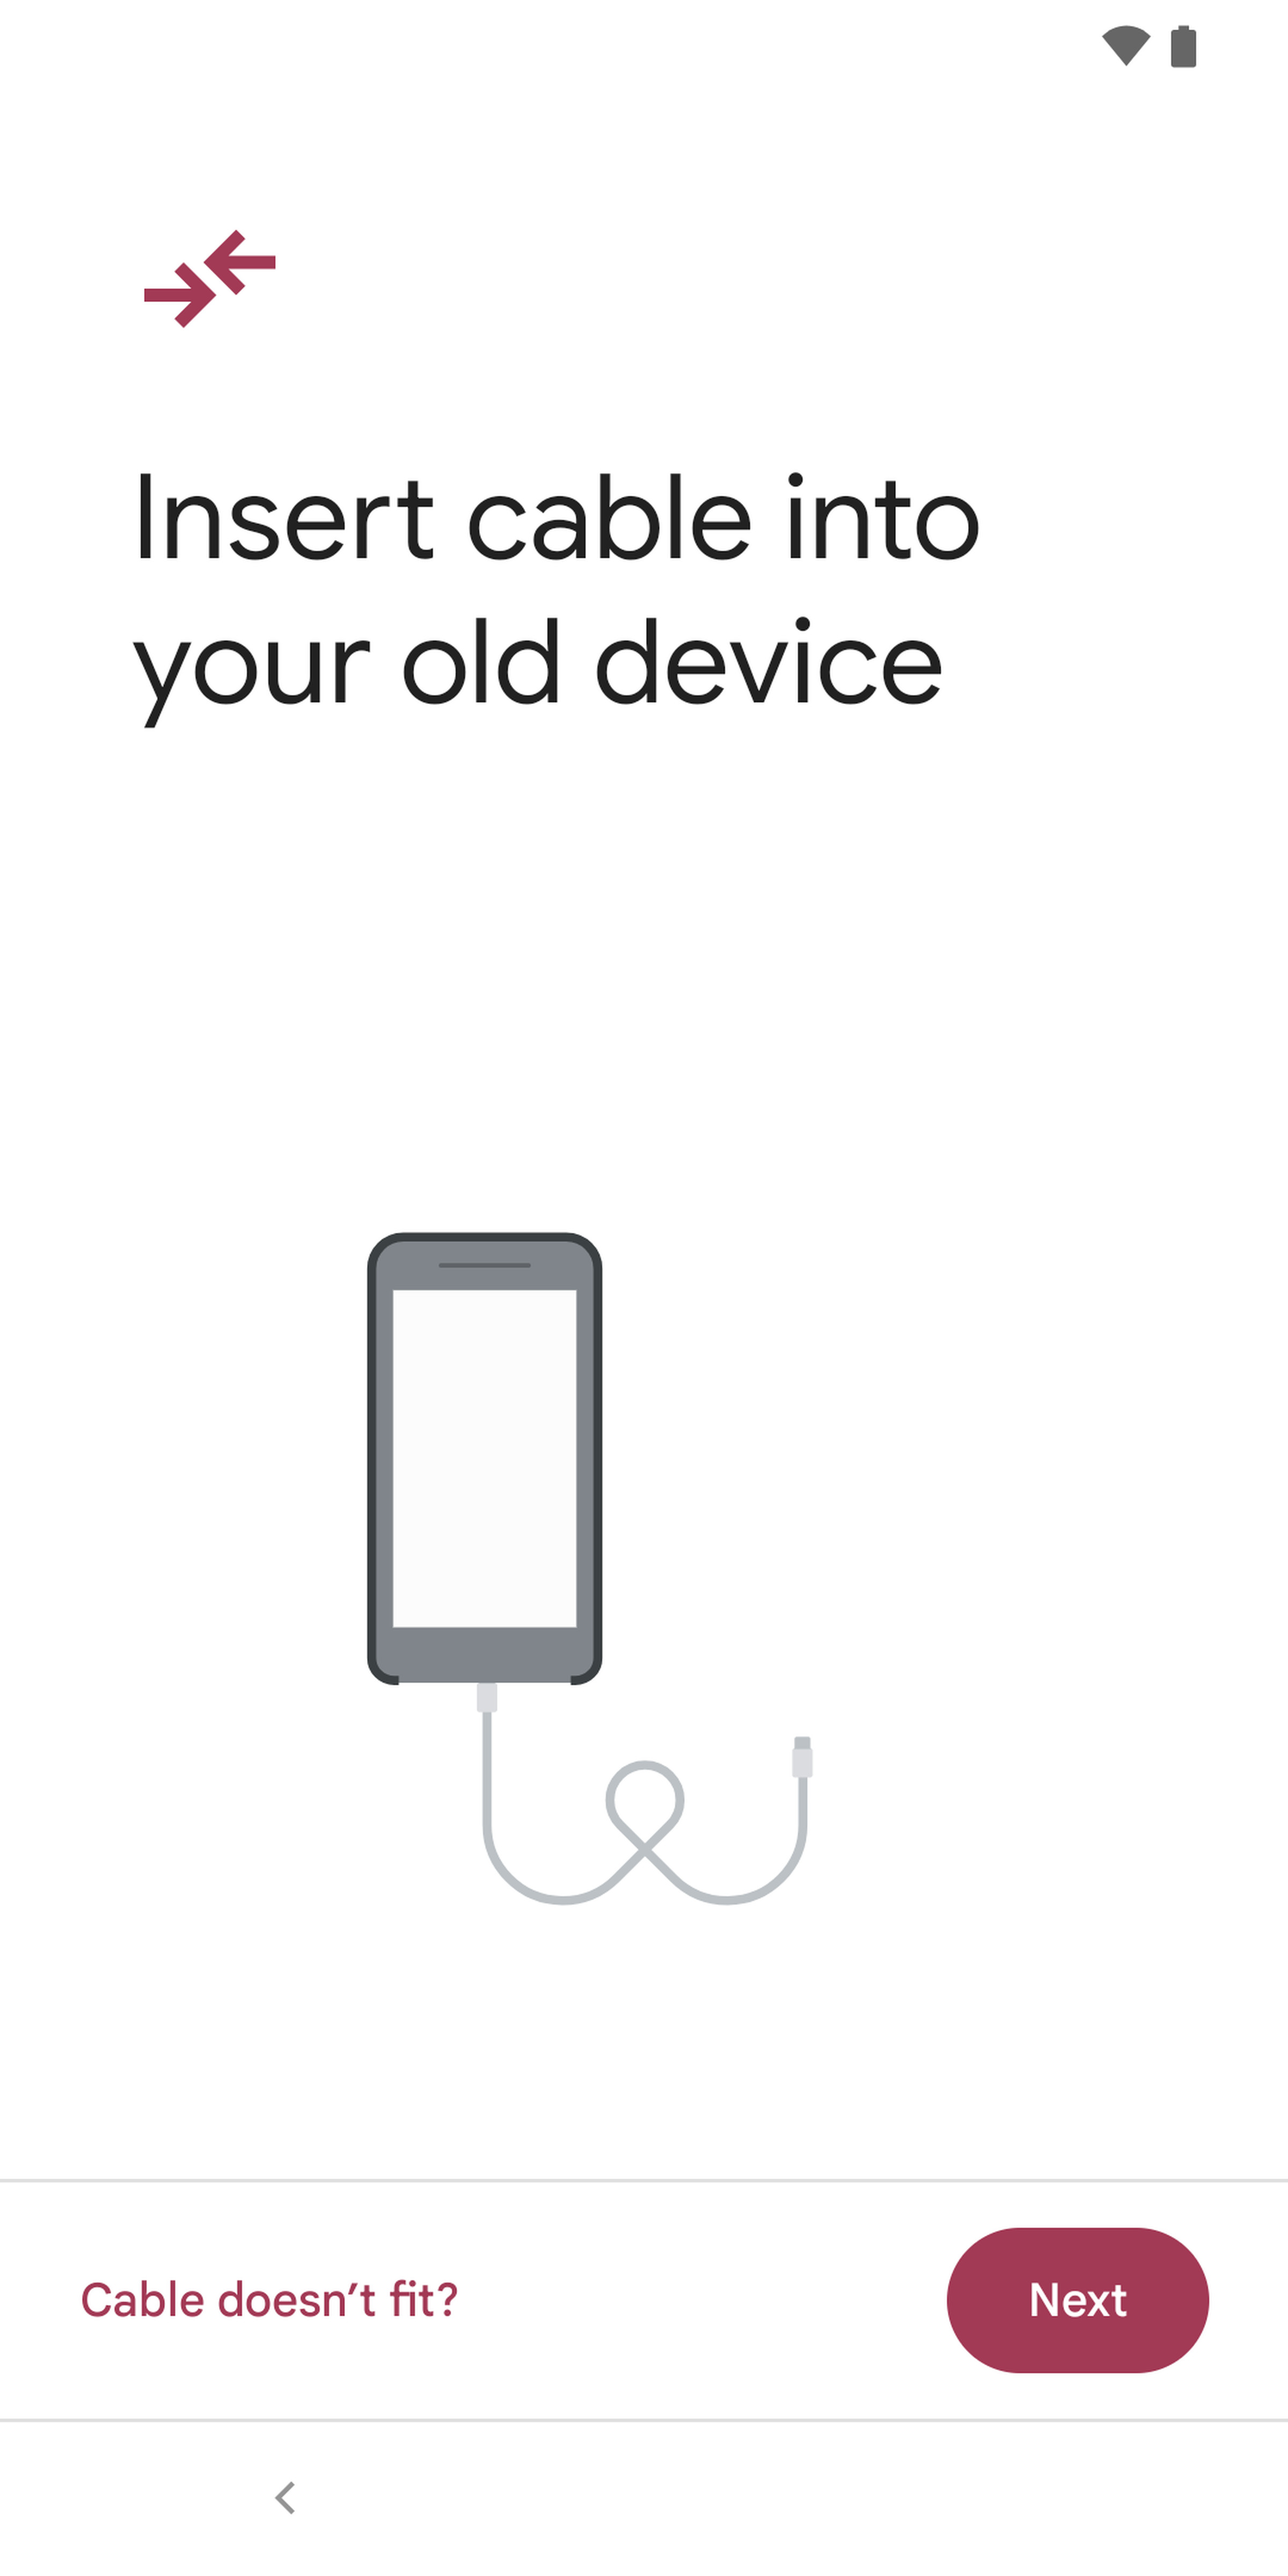 Page: Insert cable into your old device